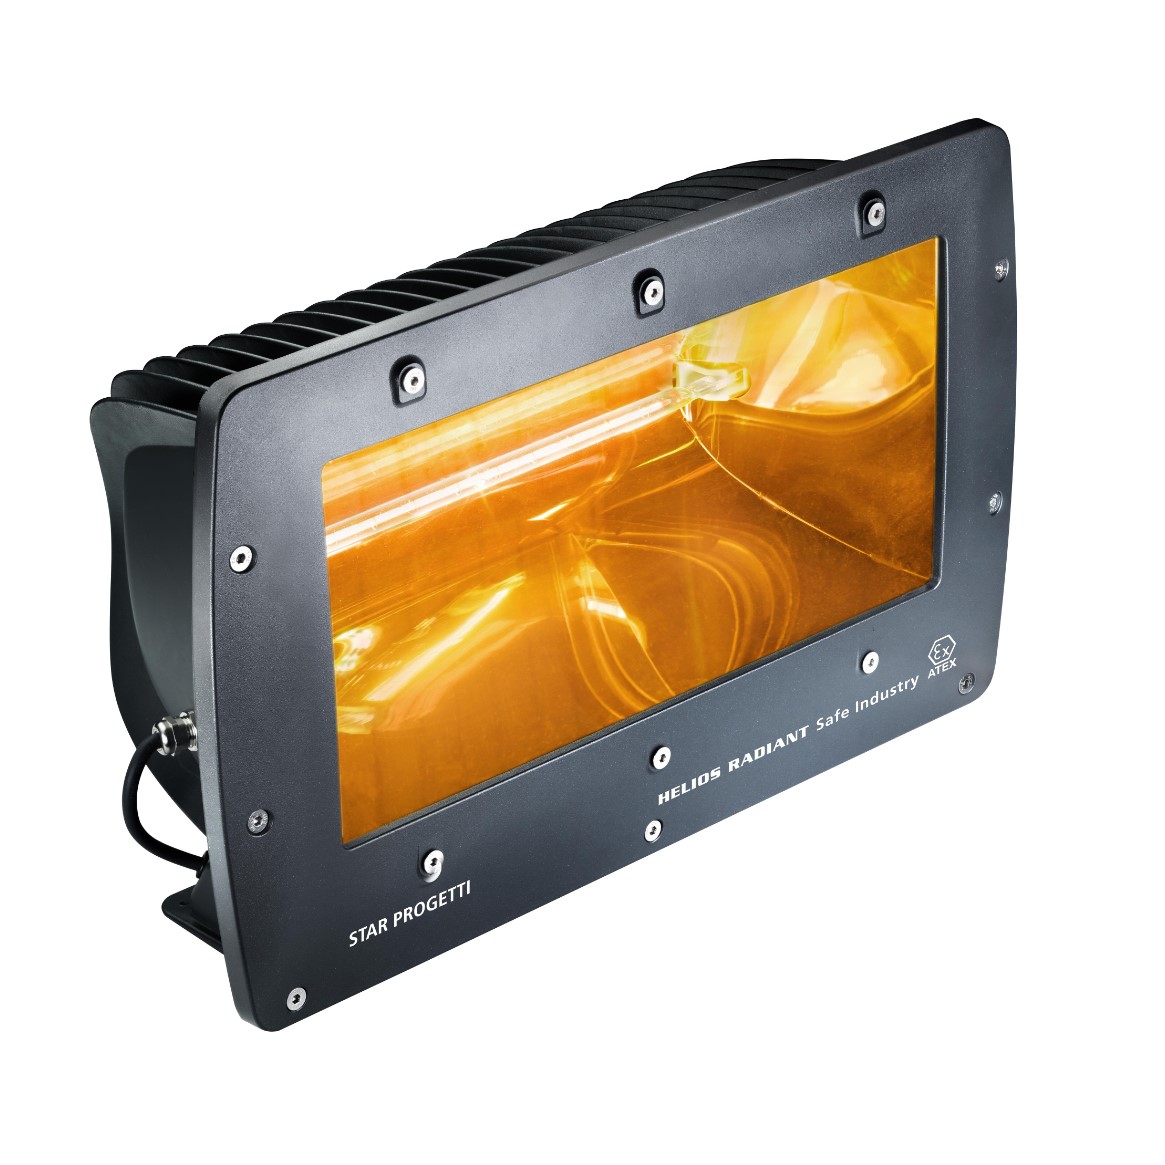 Heliosa Safe Industry infrared heater